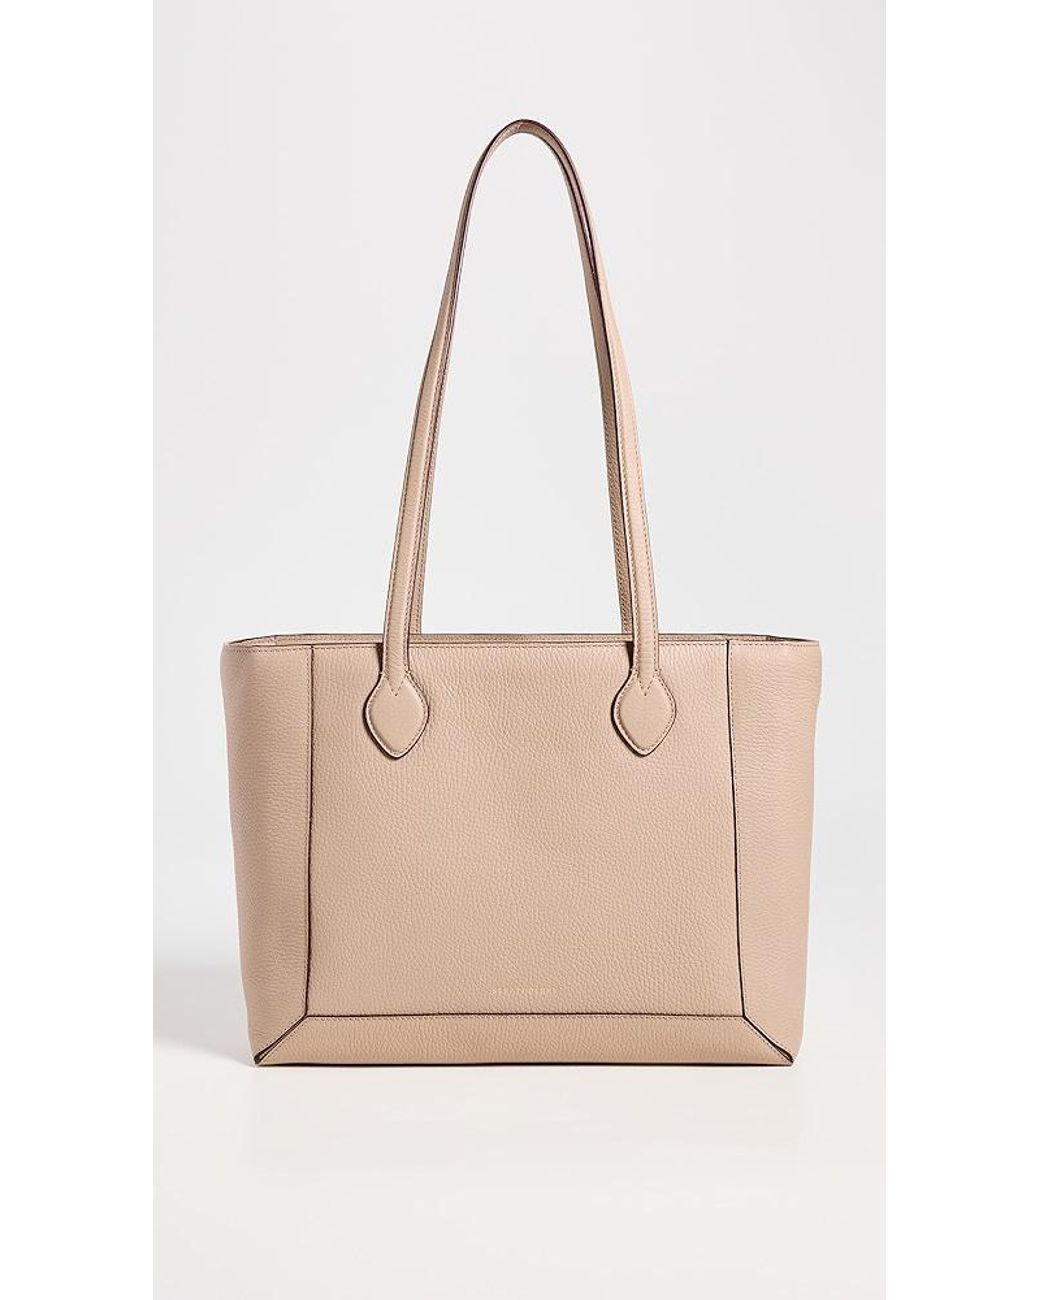 The Strathberry Tote